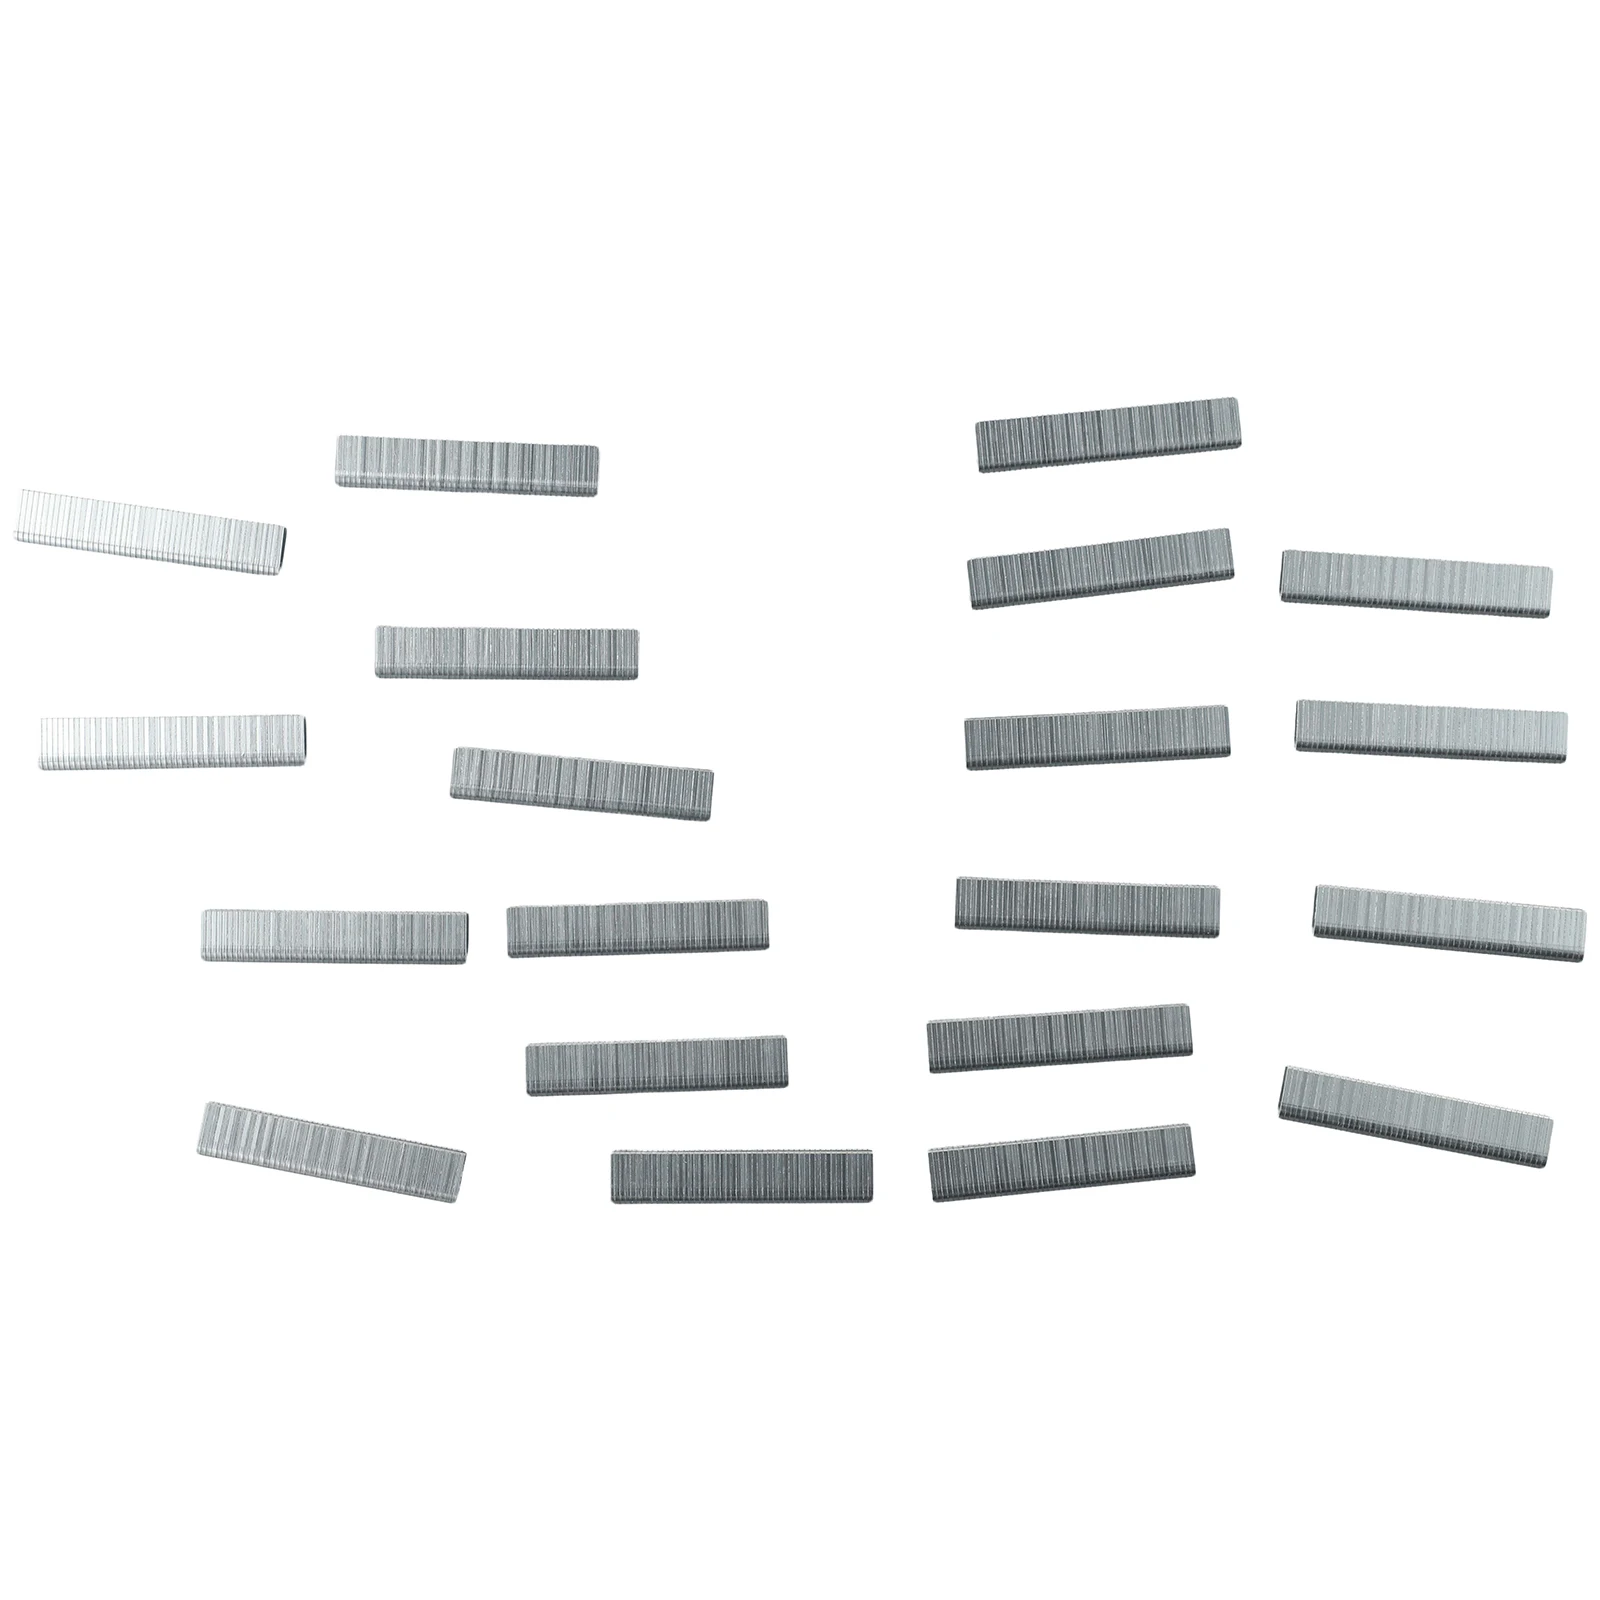 Tools Staples Nails 12mm/8mm/10mm Brad Nails Door Nail Household Silver Stapler T Shaped U Shape Wood Furniture durable staples nails household packaging silver stapler t shaped u shape wood furniture 1000pcs 12mm 8mm 10mm